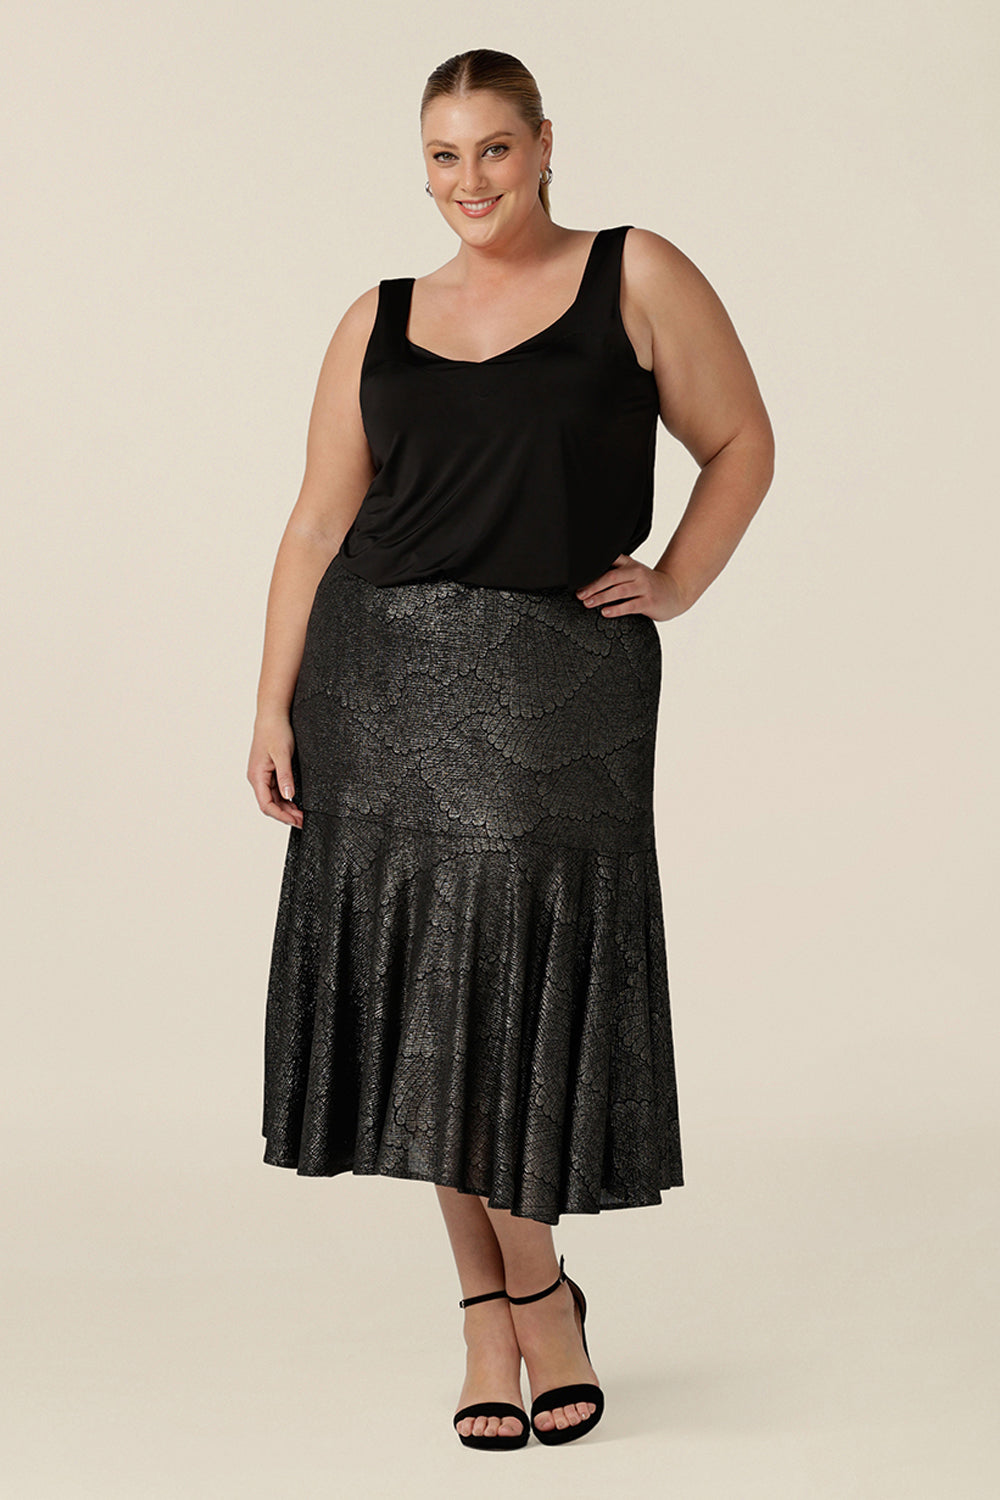 A size 18, plus size woman wears a midi length, foil print evening skirt with ruffle hem. For cocktail and evening wear, this elegant skirt is worn with a black cami top. Both cocktail skirt and top are made in Australia by women's fashion brand, Leina & Fleur. Shop their evening and cocktail wear online in petite to plus sizes.